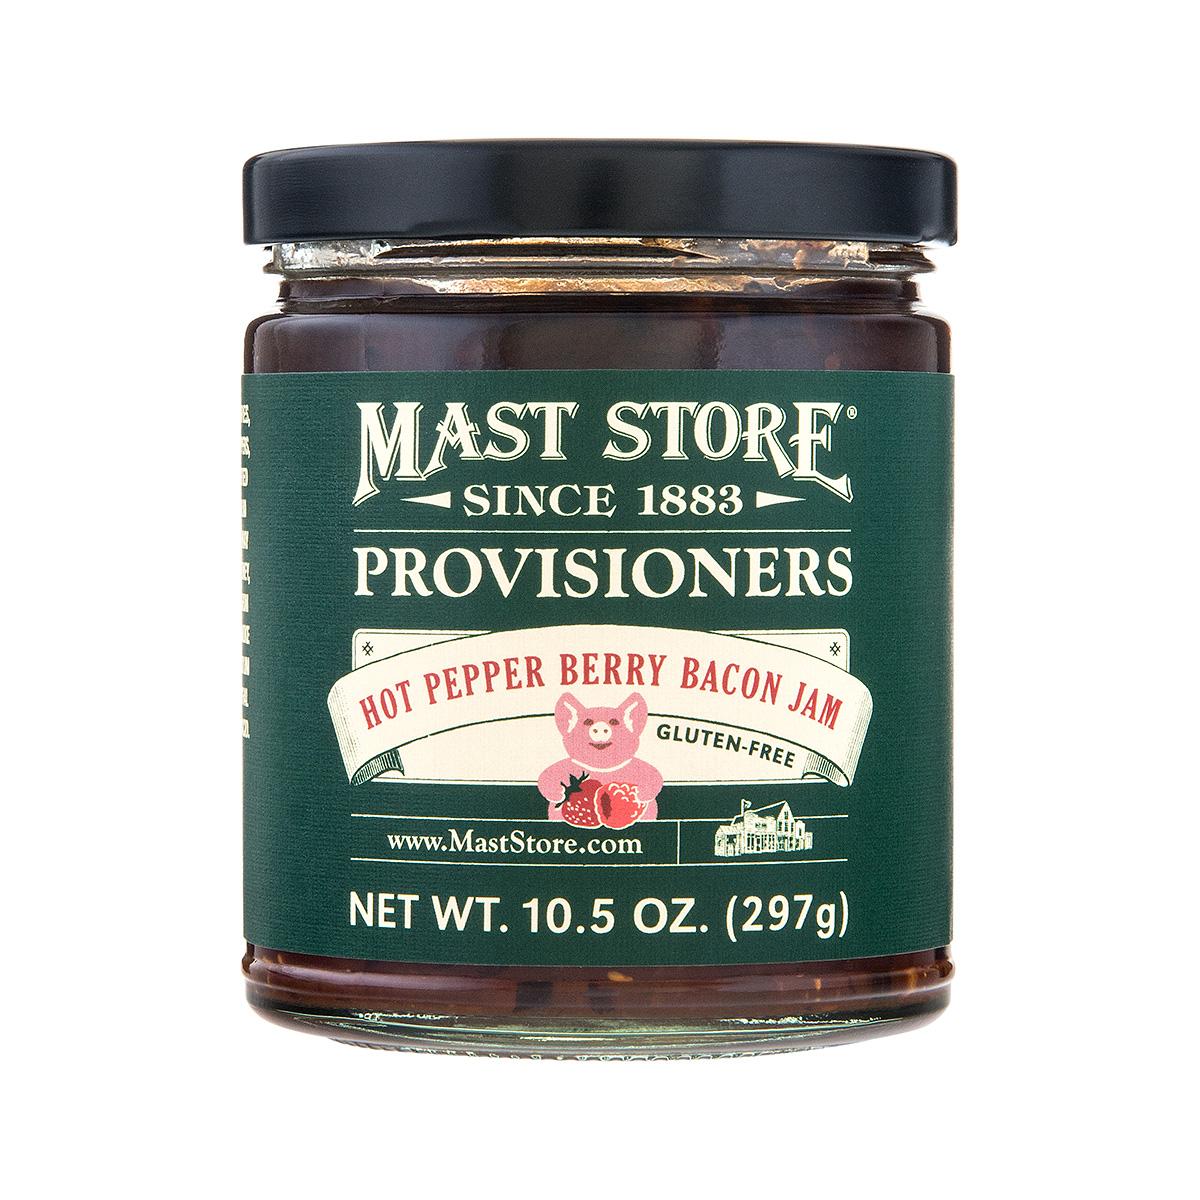  Mast Store Provisioners Hot Pepper Berry Bacon Jam